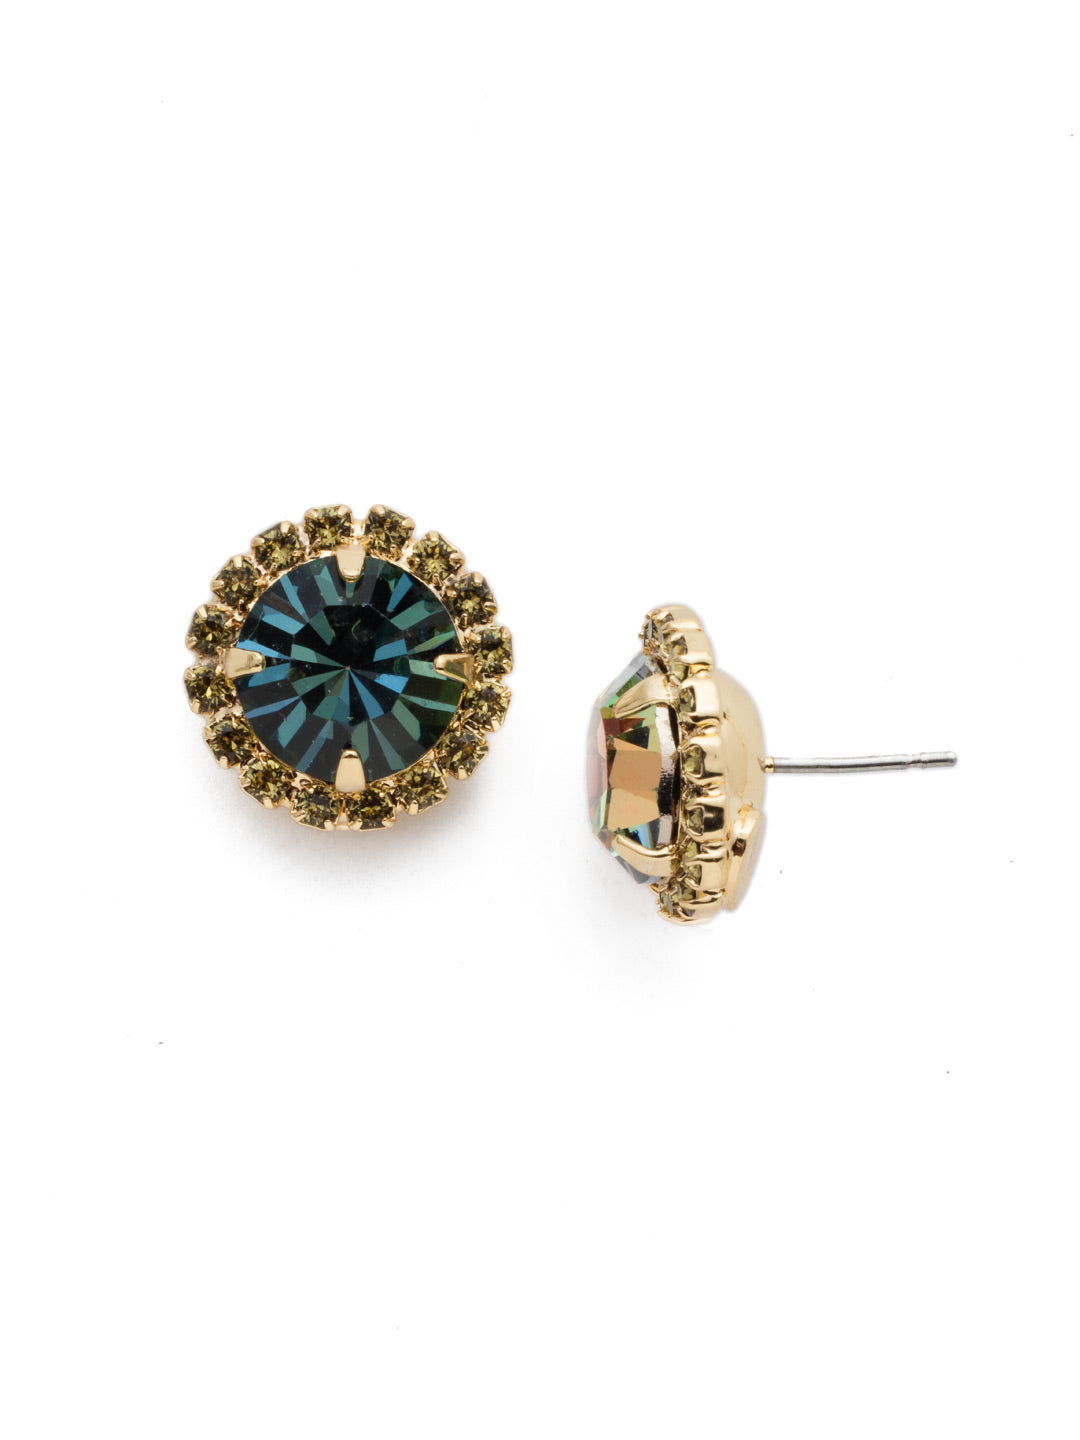 Haute Halo Stud Earring - ECX98BGCSM - A central round crystal with an elegant halo of gems embodies elegance and style. From Sorrelli's Cashmere collection in our Bright Gold-tone finish.